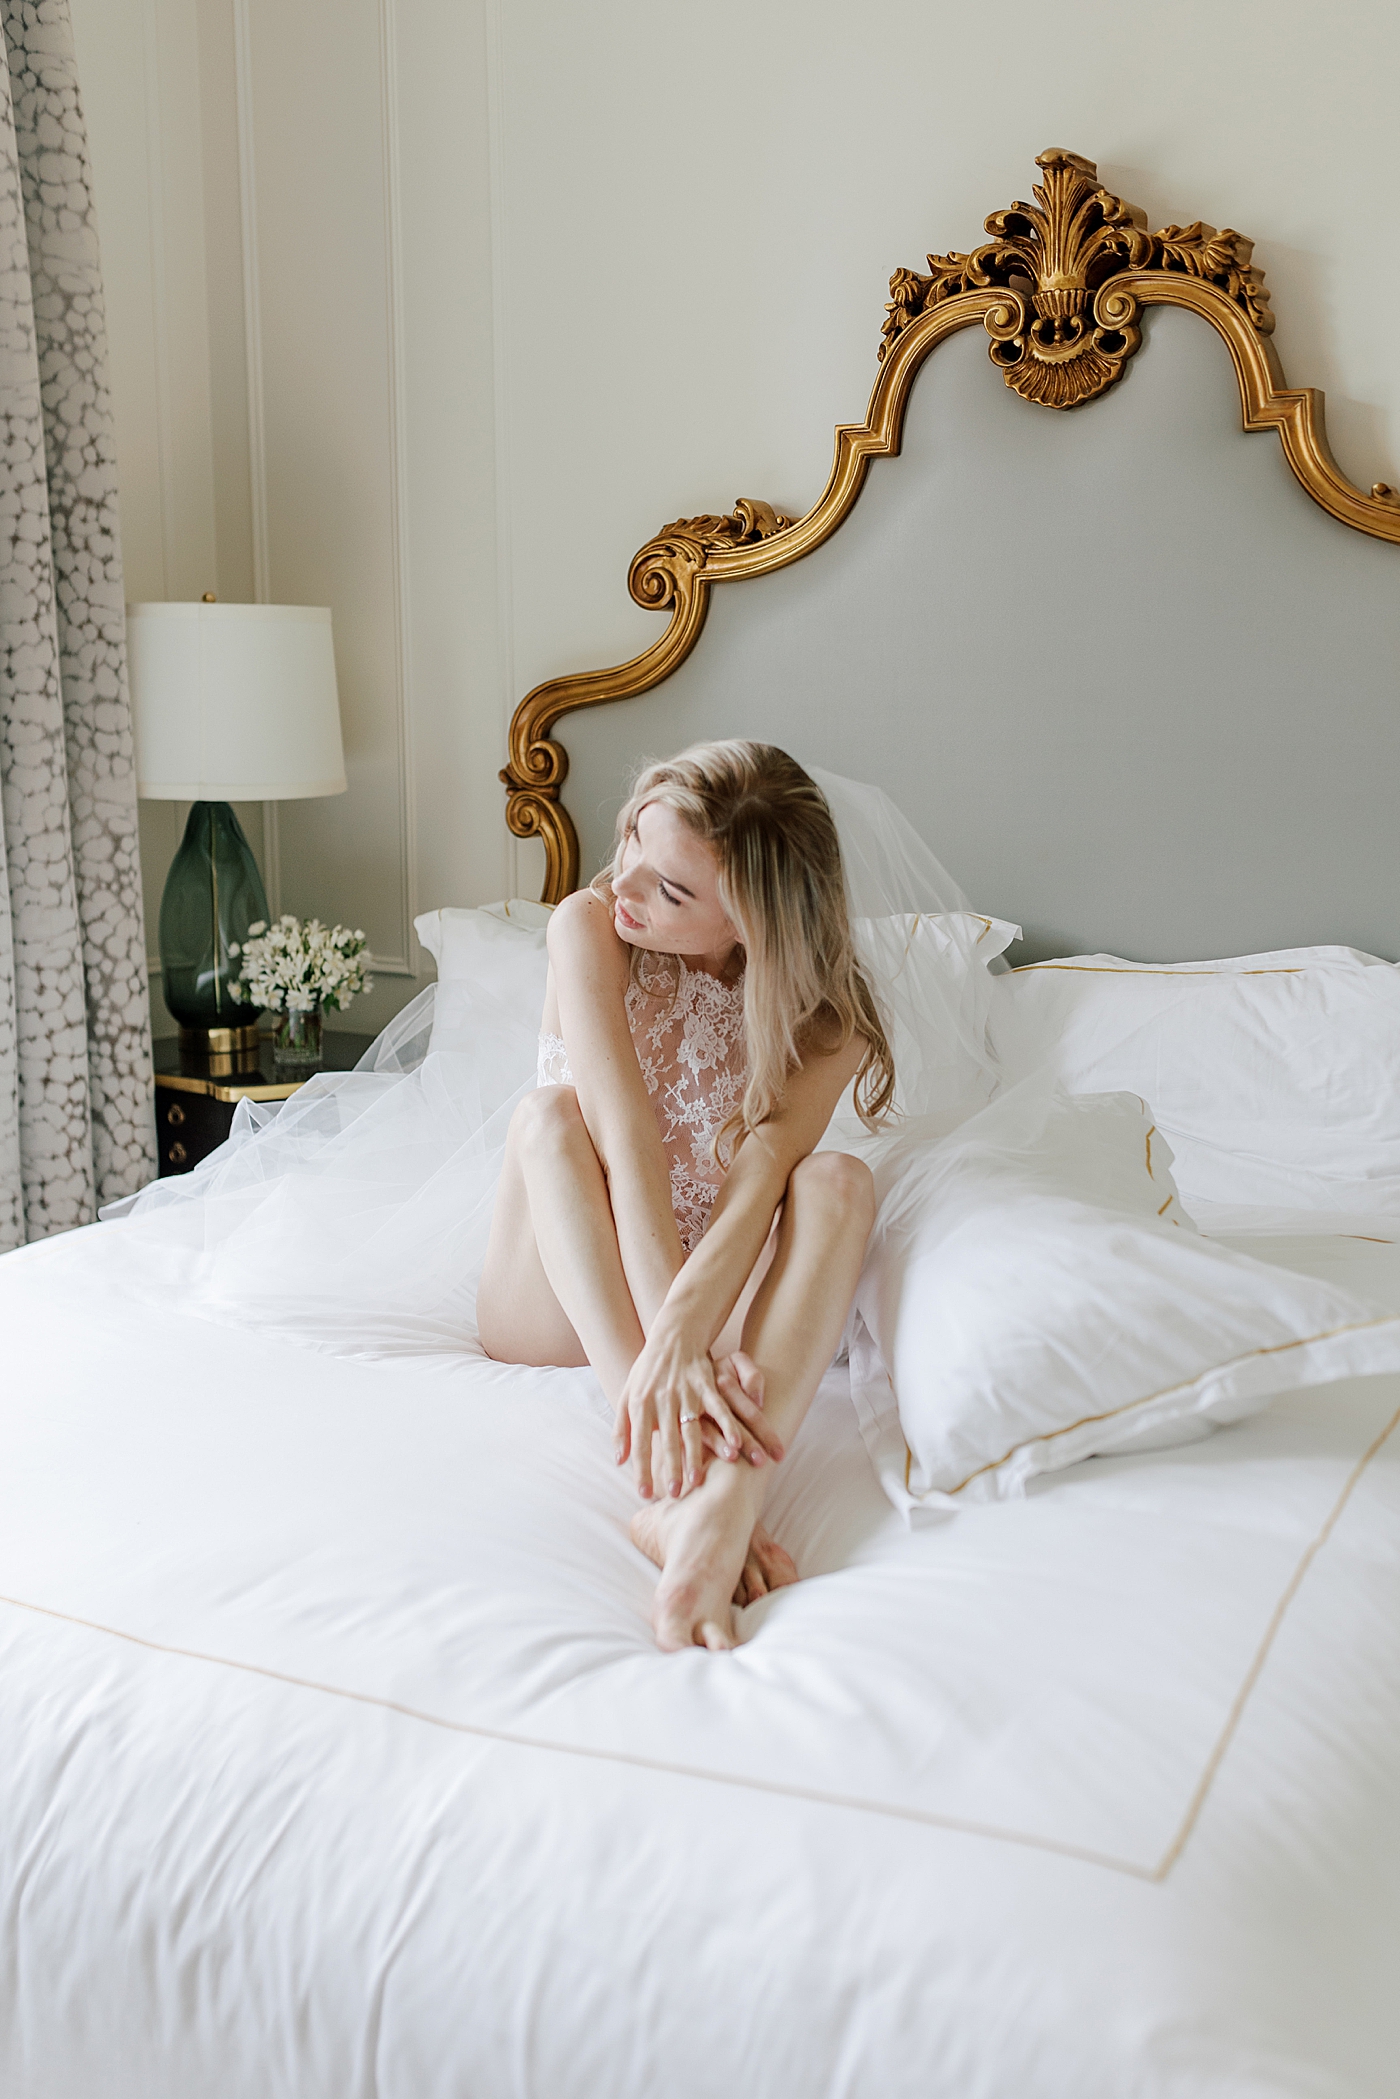 Bride-to-be posing in white lingerie on a romantic, luxe white bed | Image by Hope Helmuth Photography